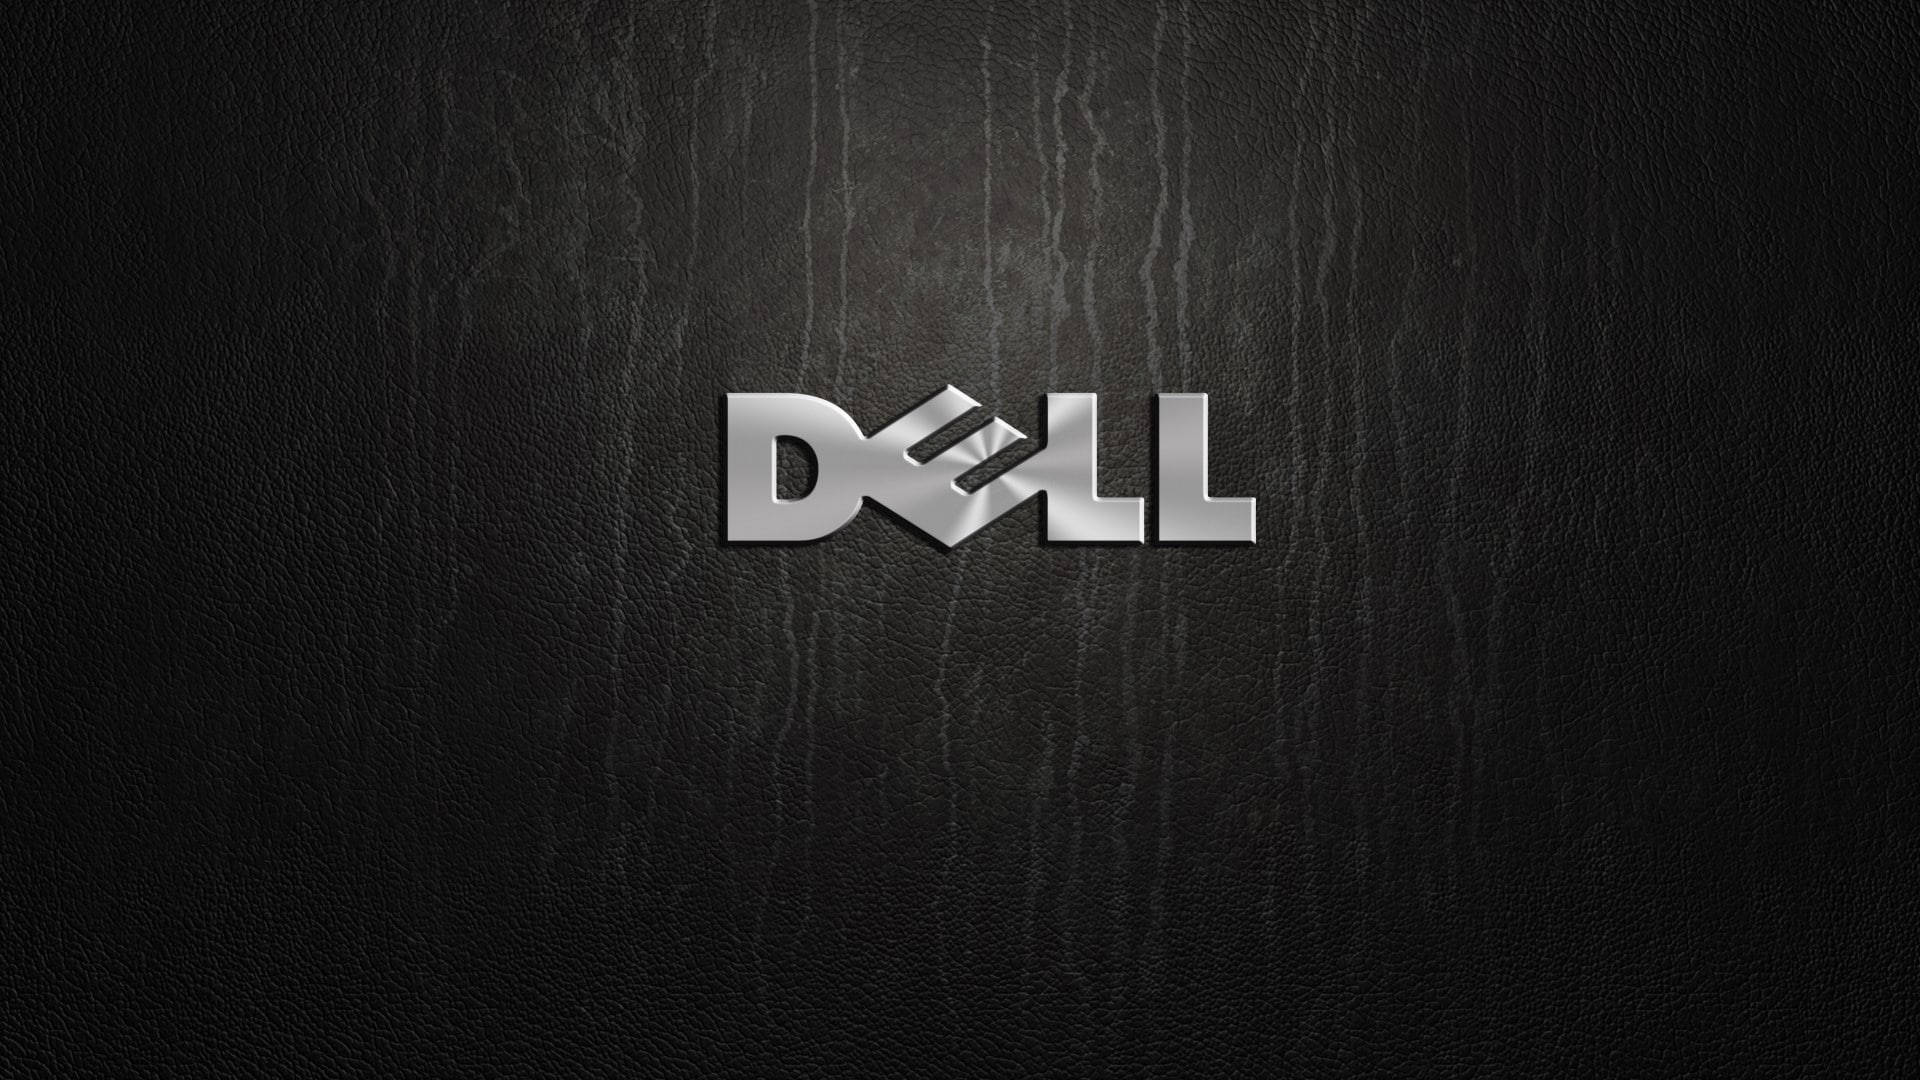 Dell Laptop Logo Stained